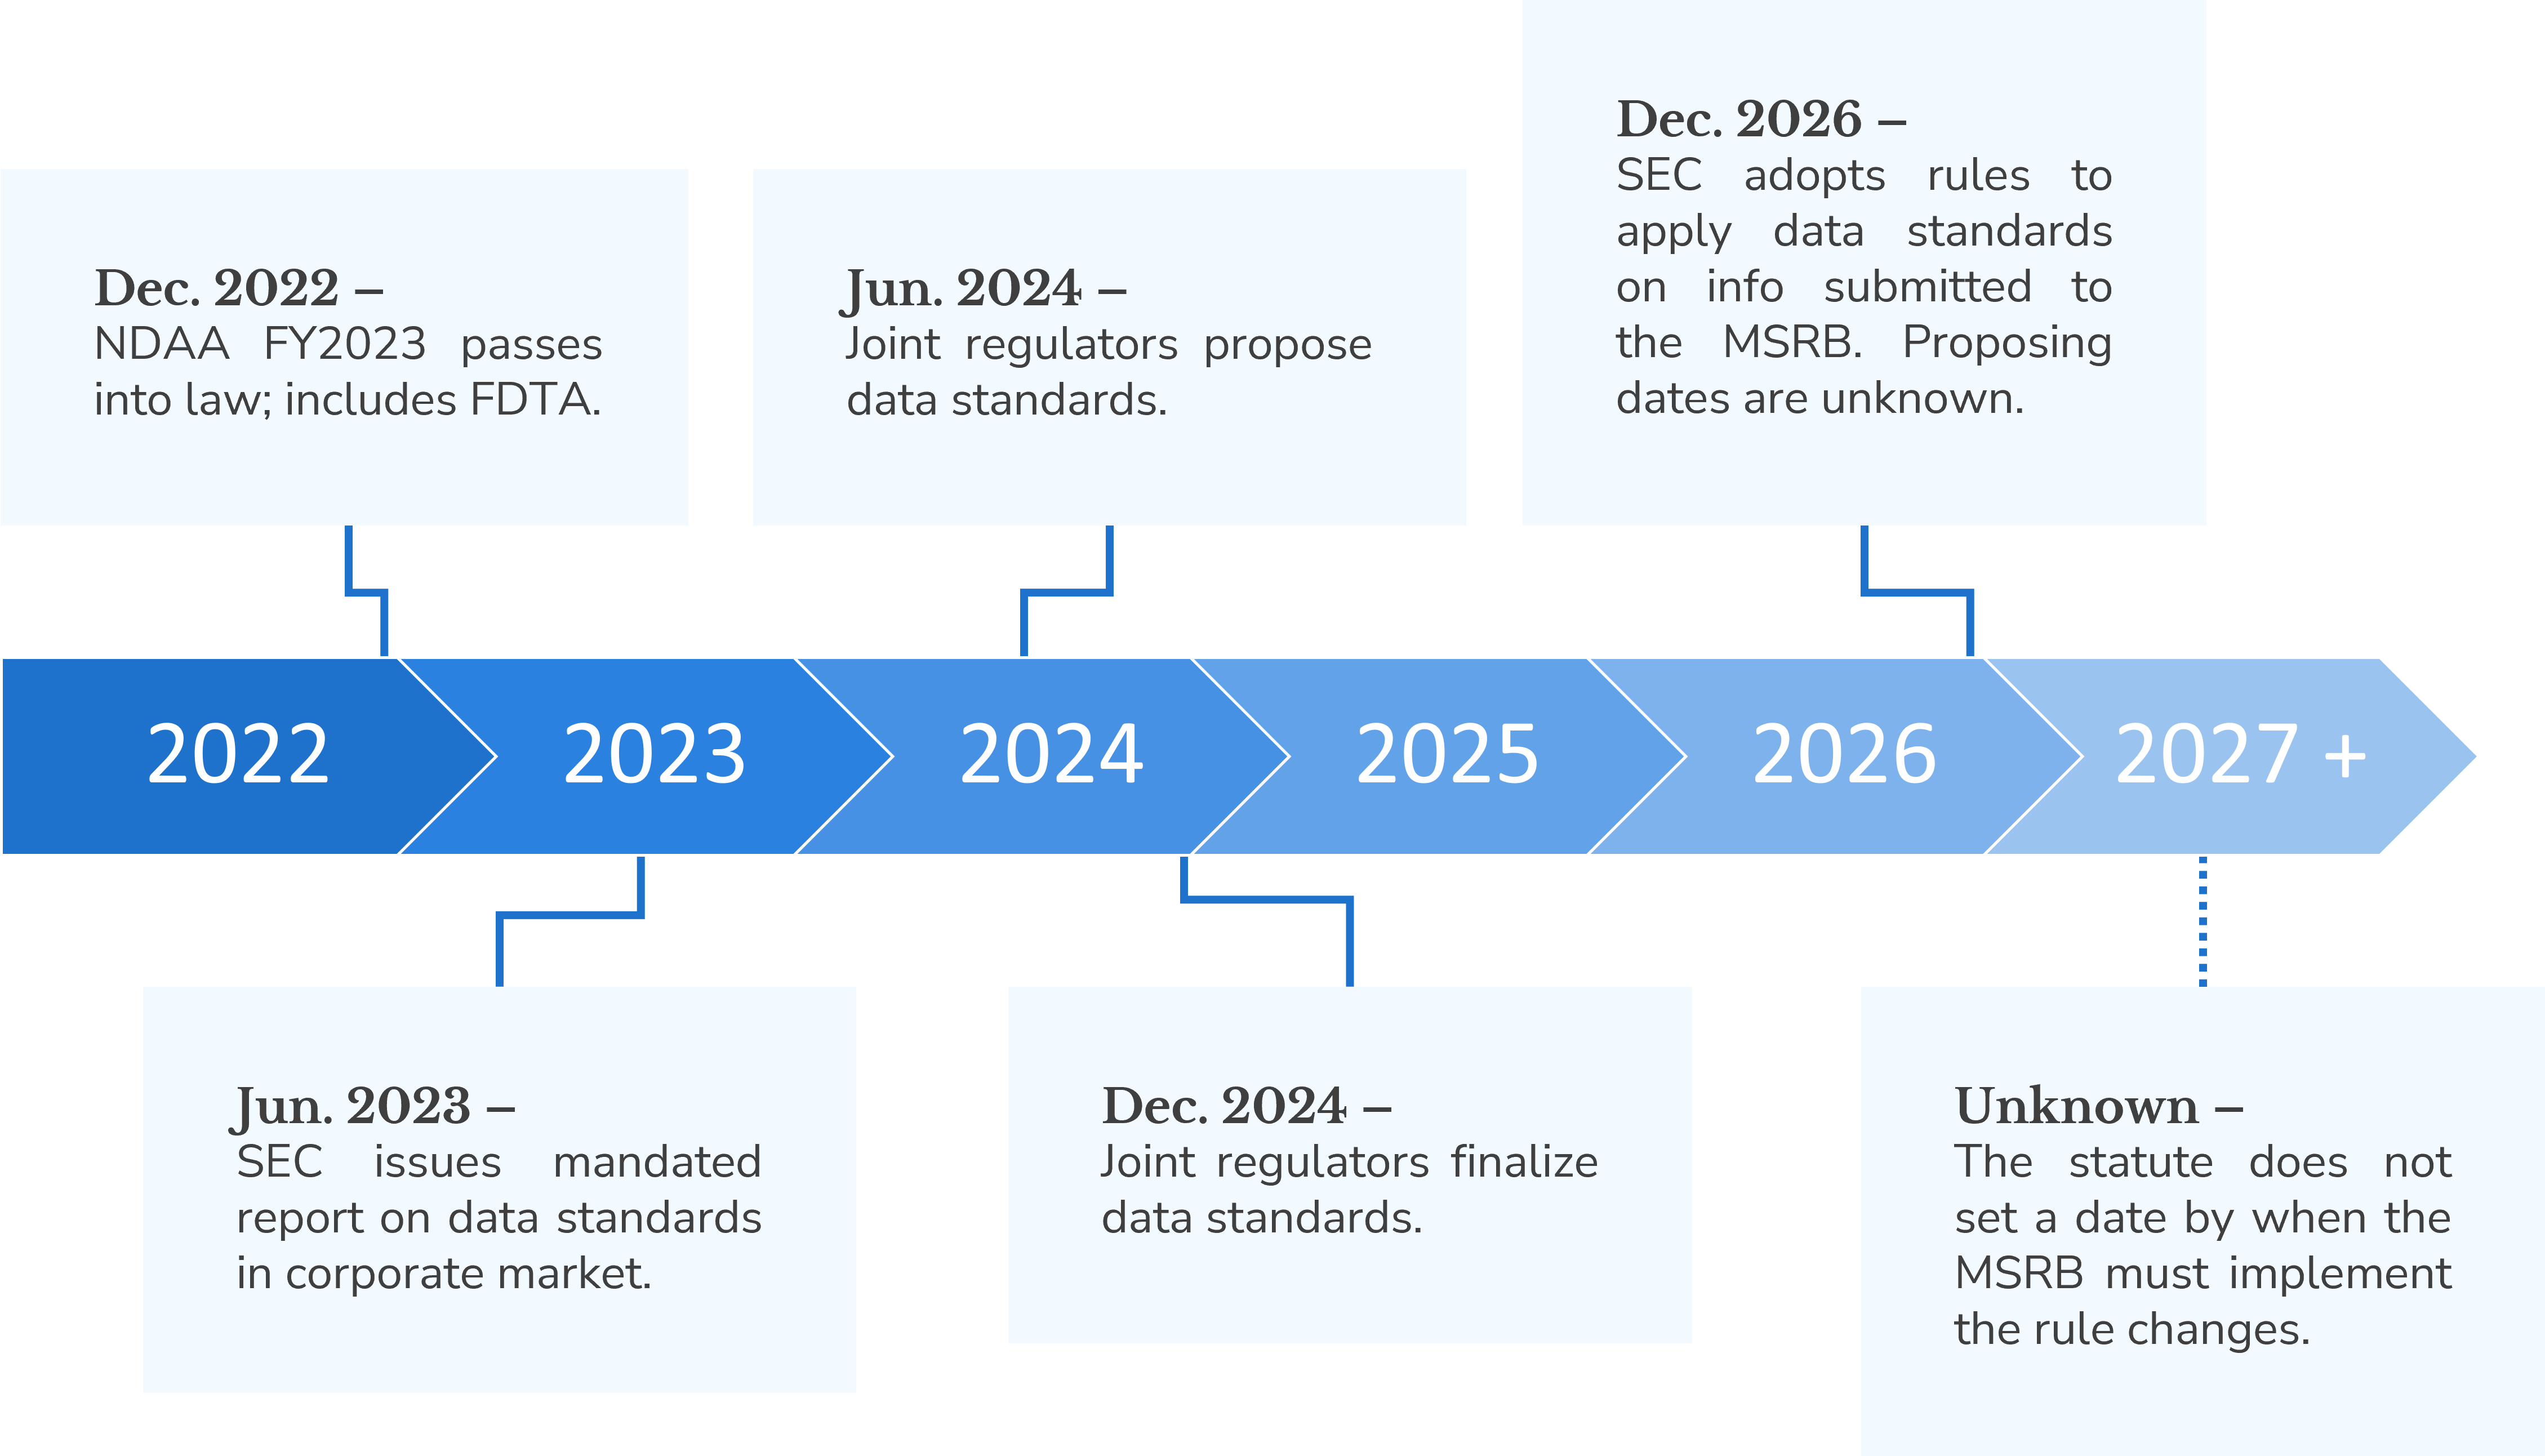 Image of a timeline indicating key implementation dates relating to the Financial Data Transparency Act (FDTA).